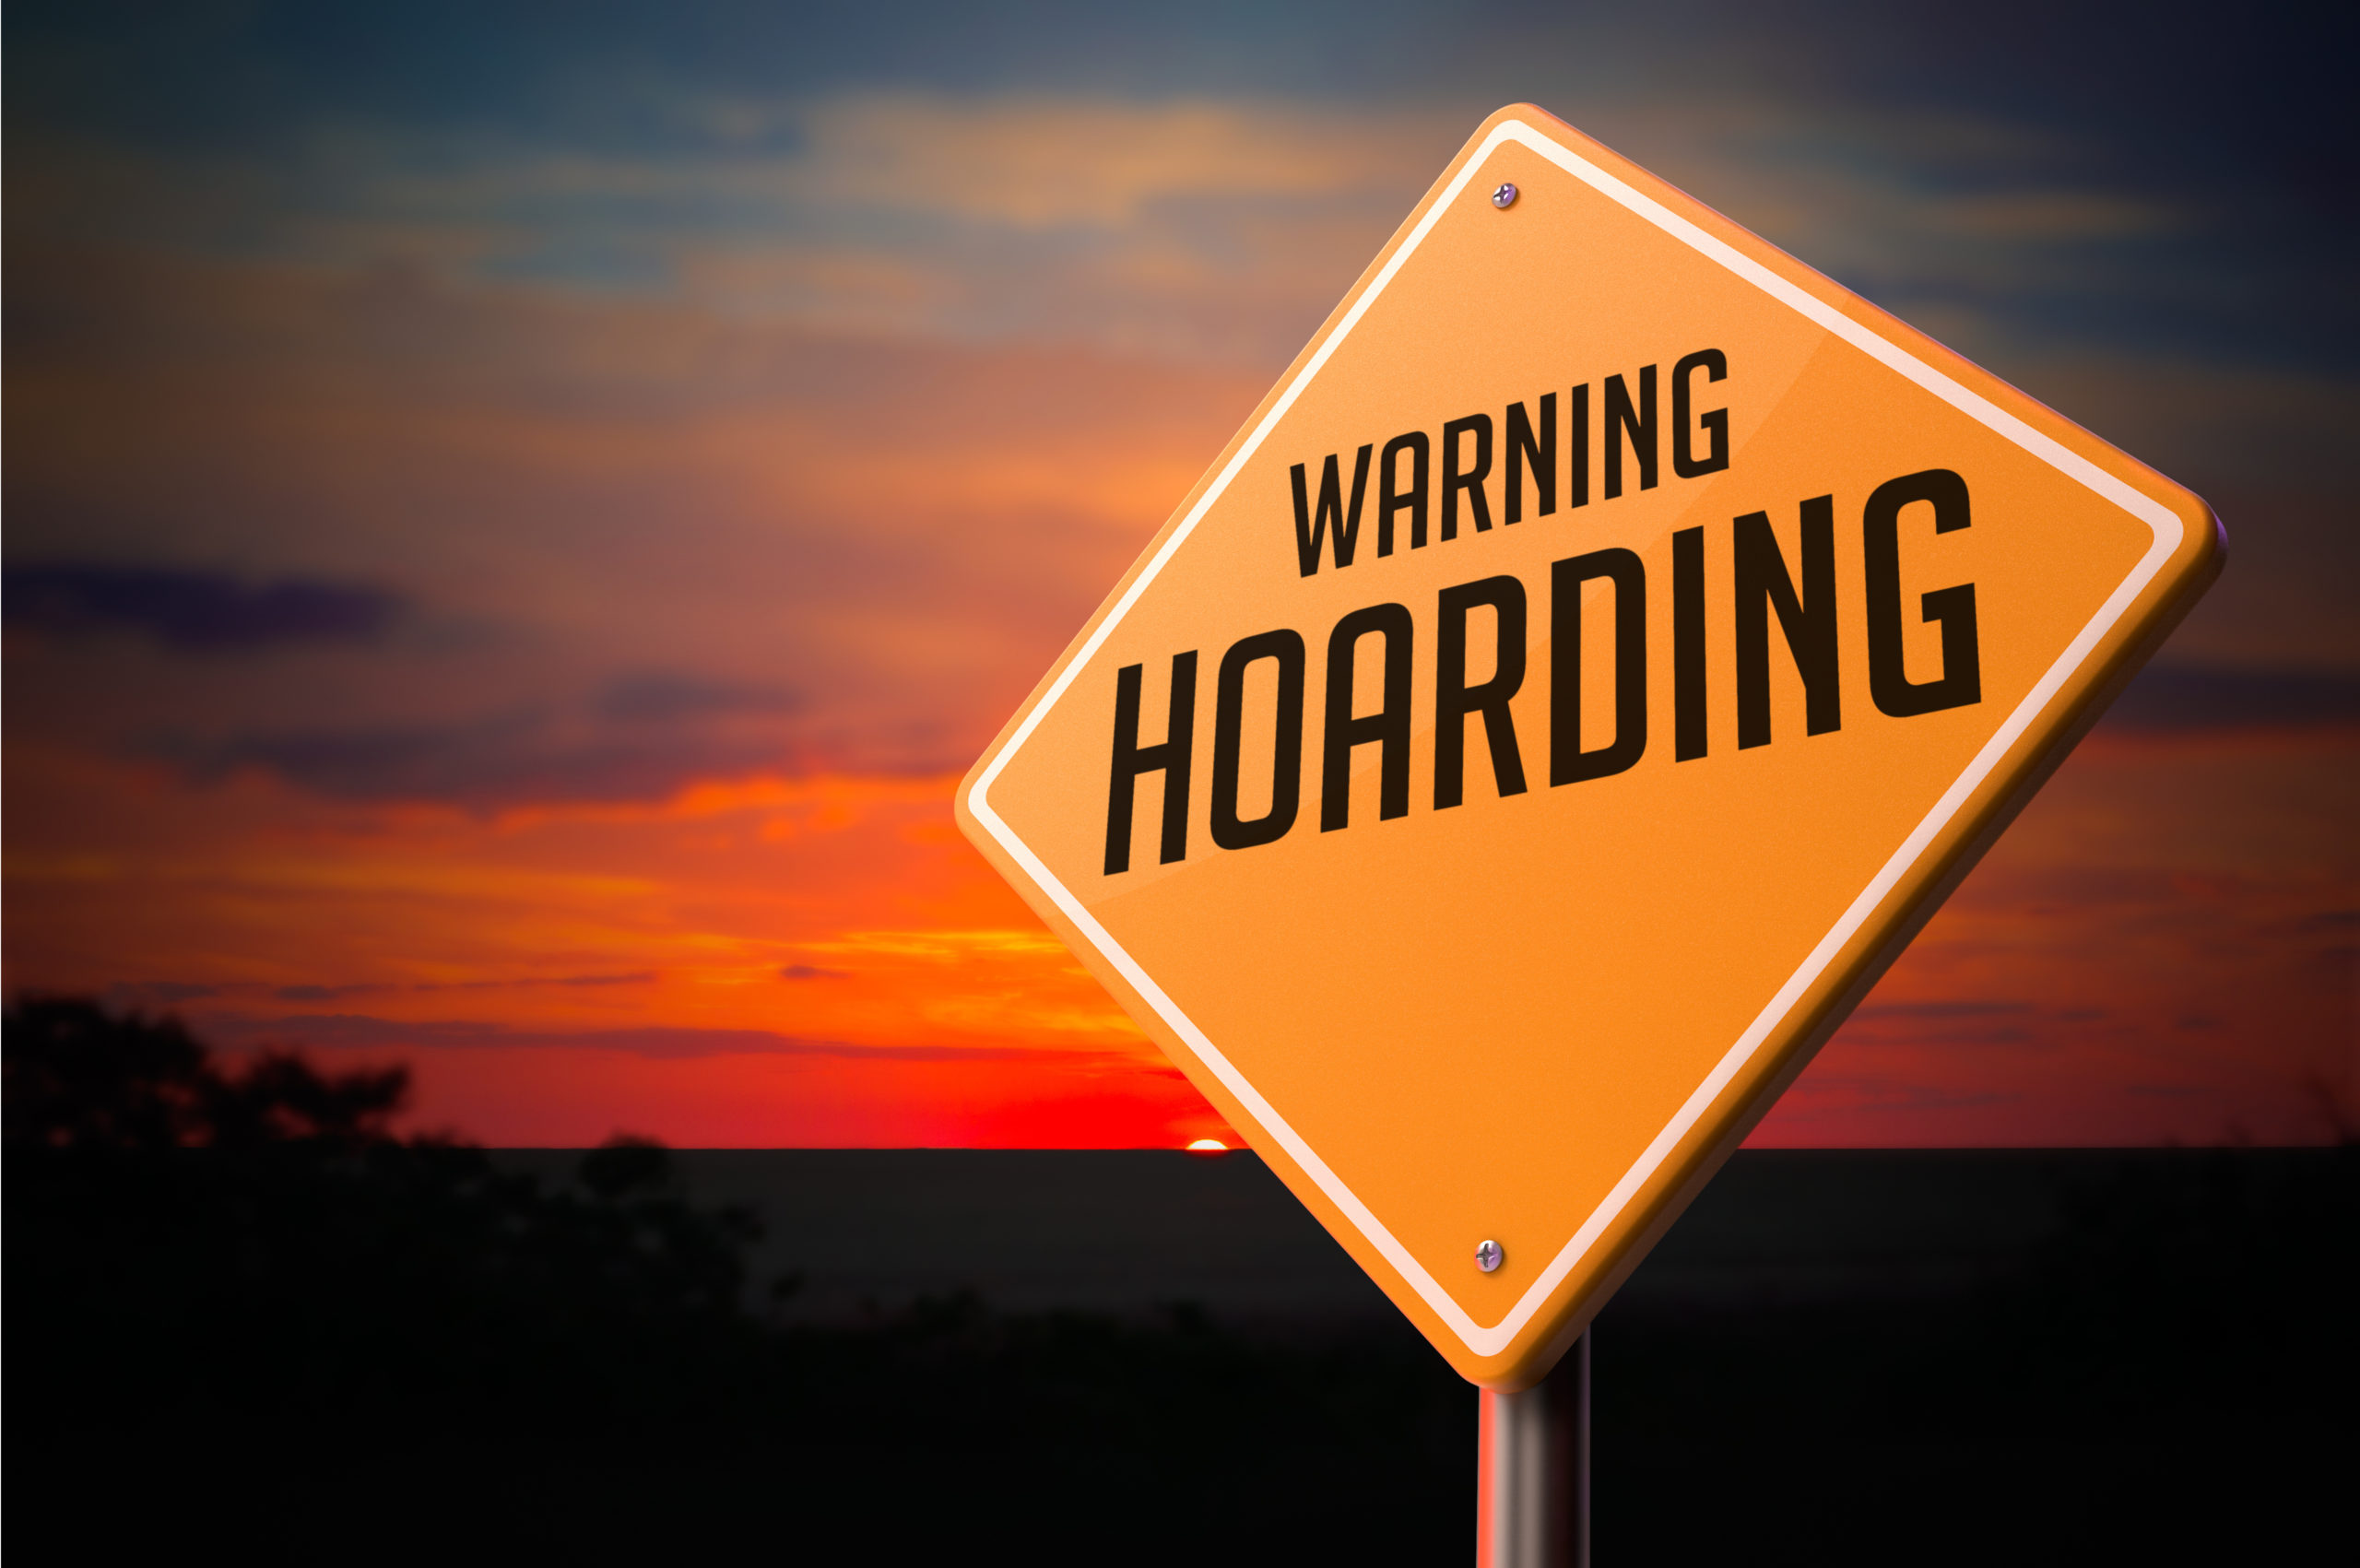 A hoarding warning sign